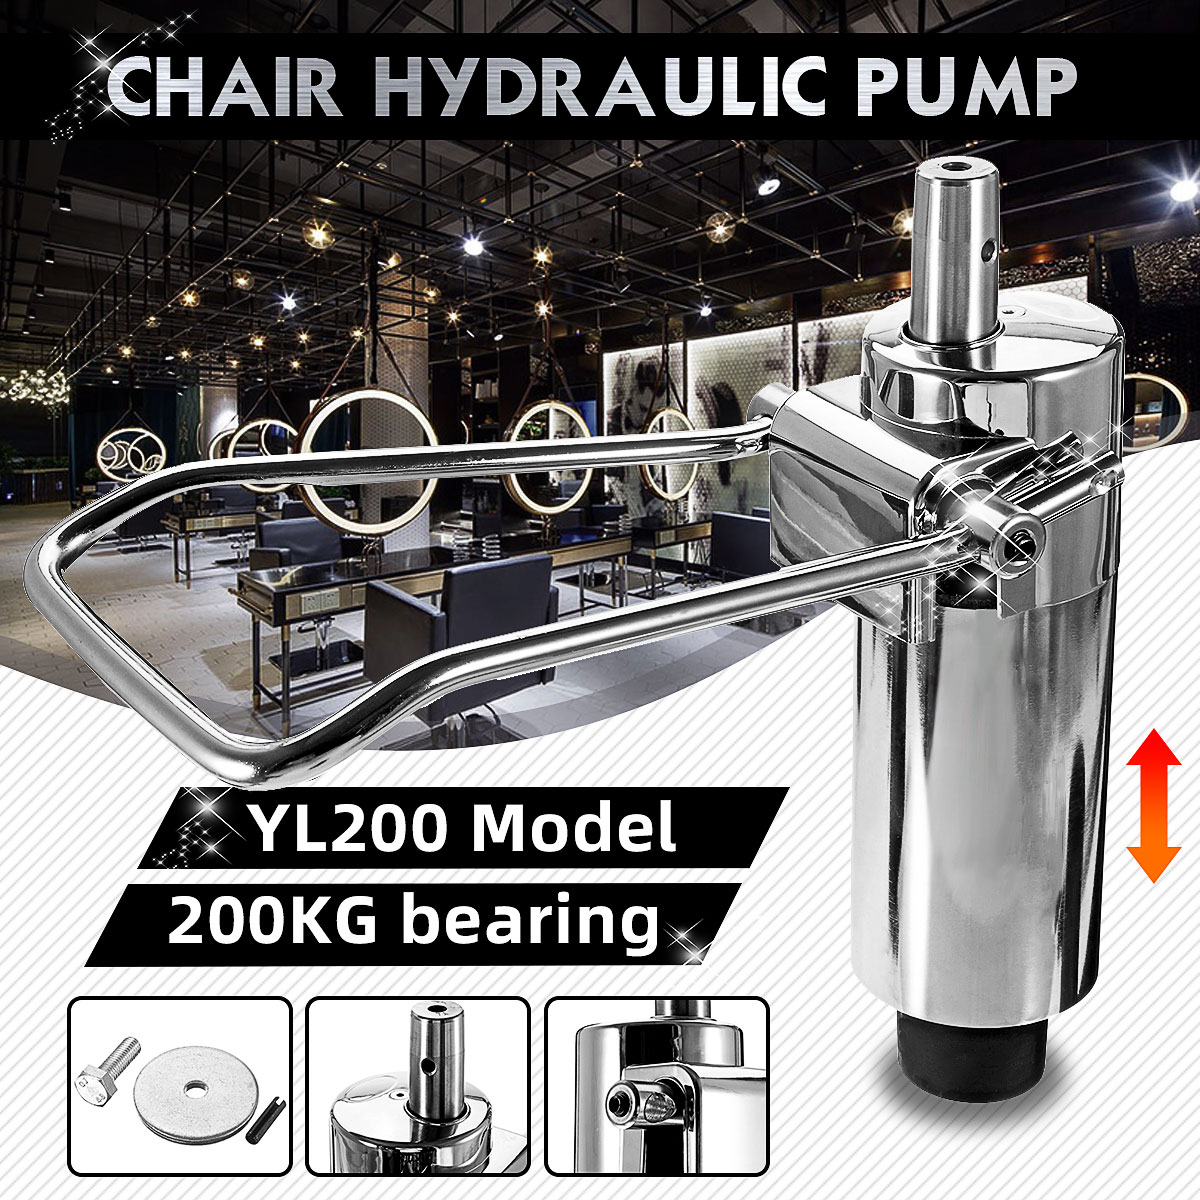 Hydraulic-Pump-Replacement-For-Barber-Hairdressing-Chair-Salon-Lift-Equipment-1774416-2